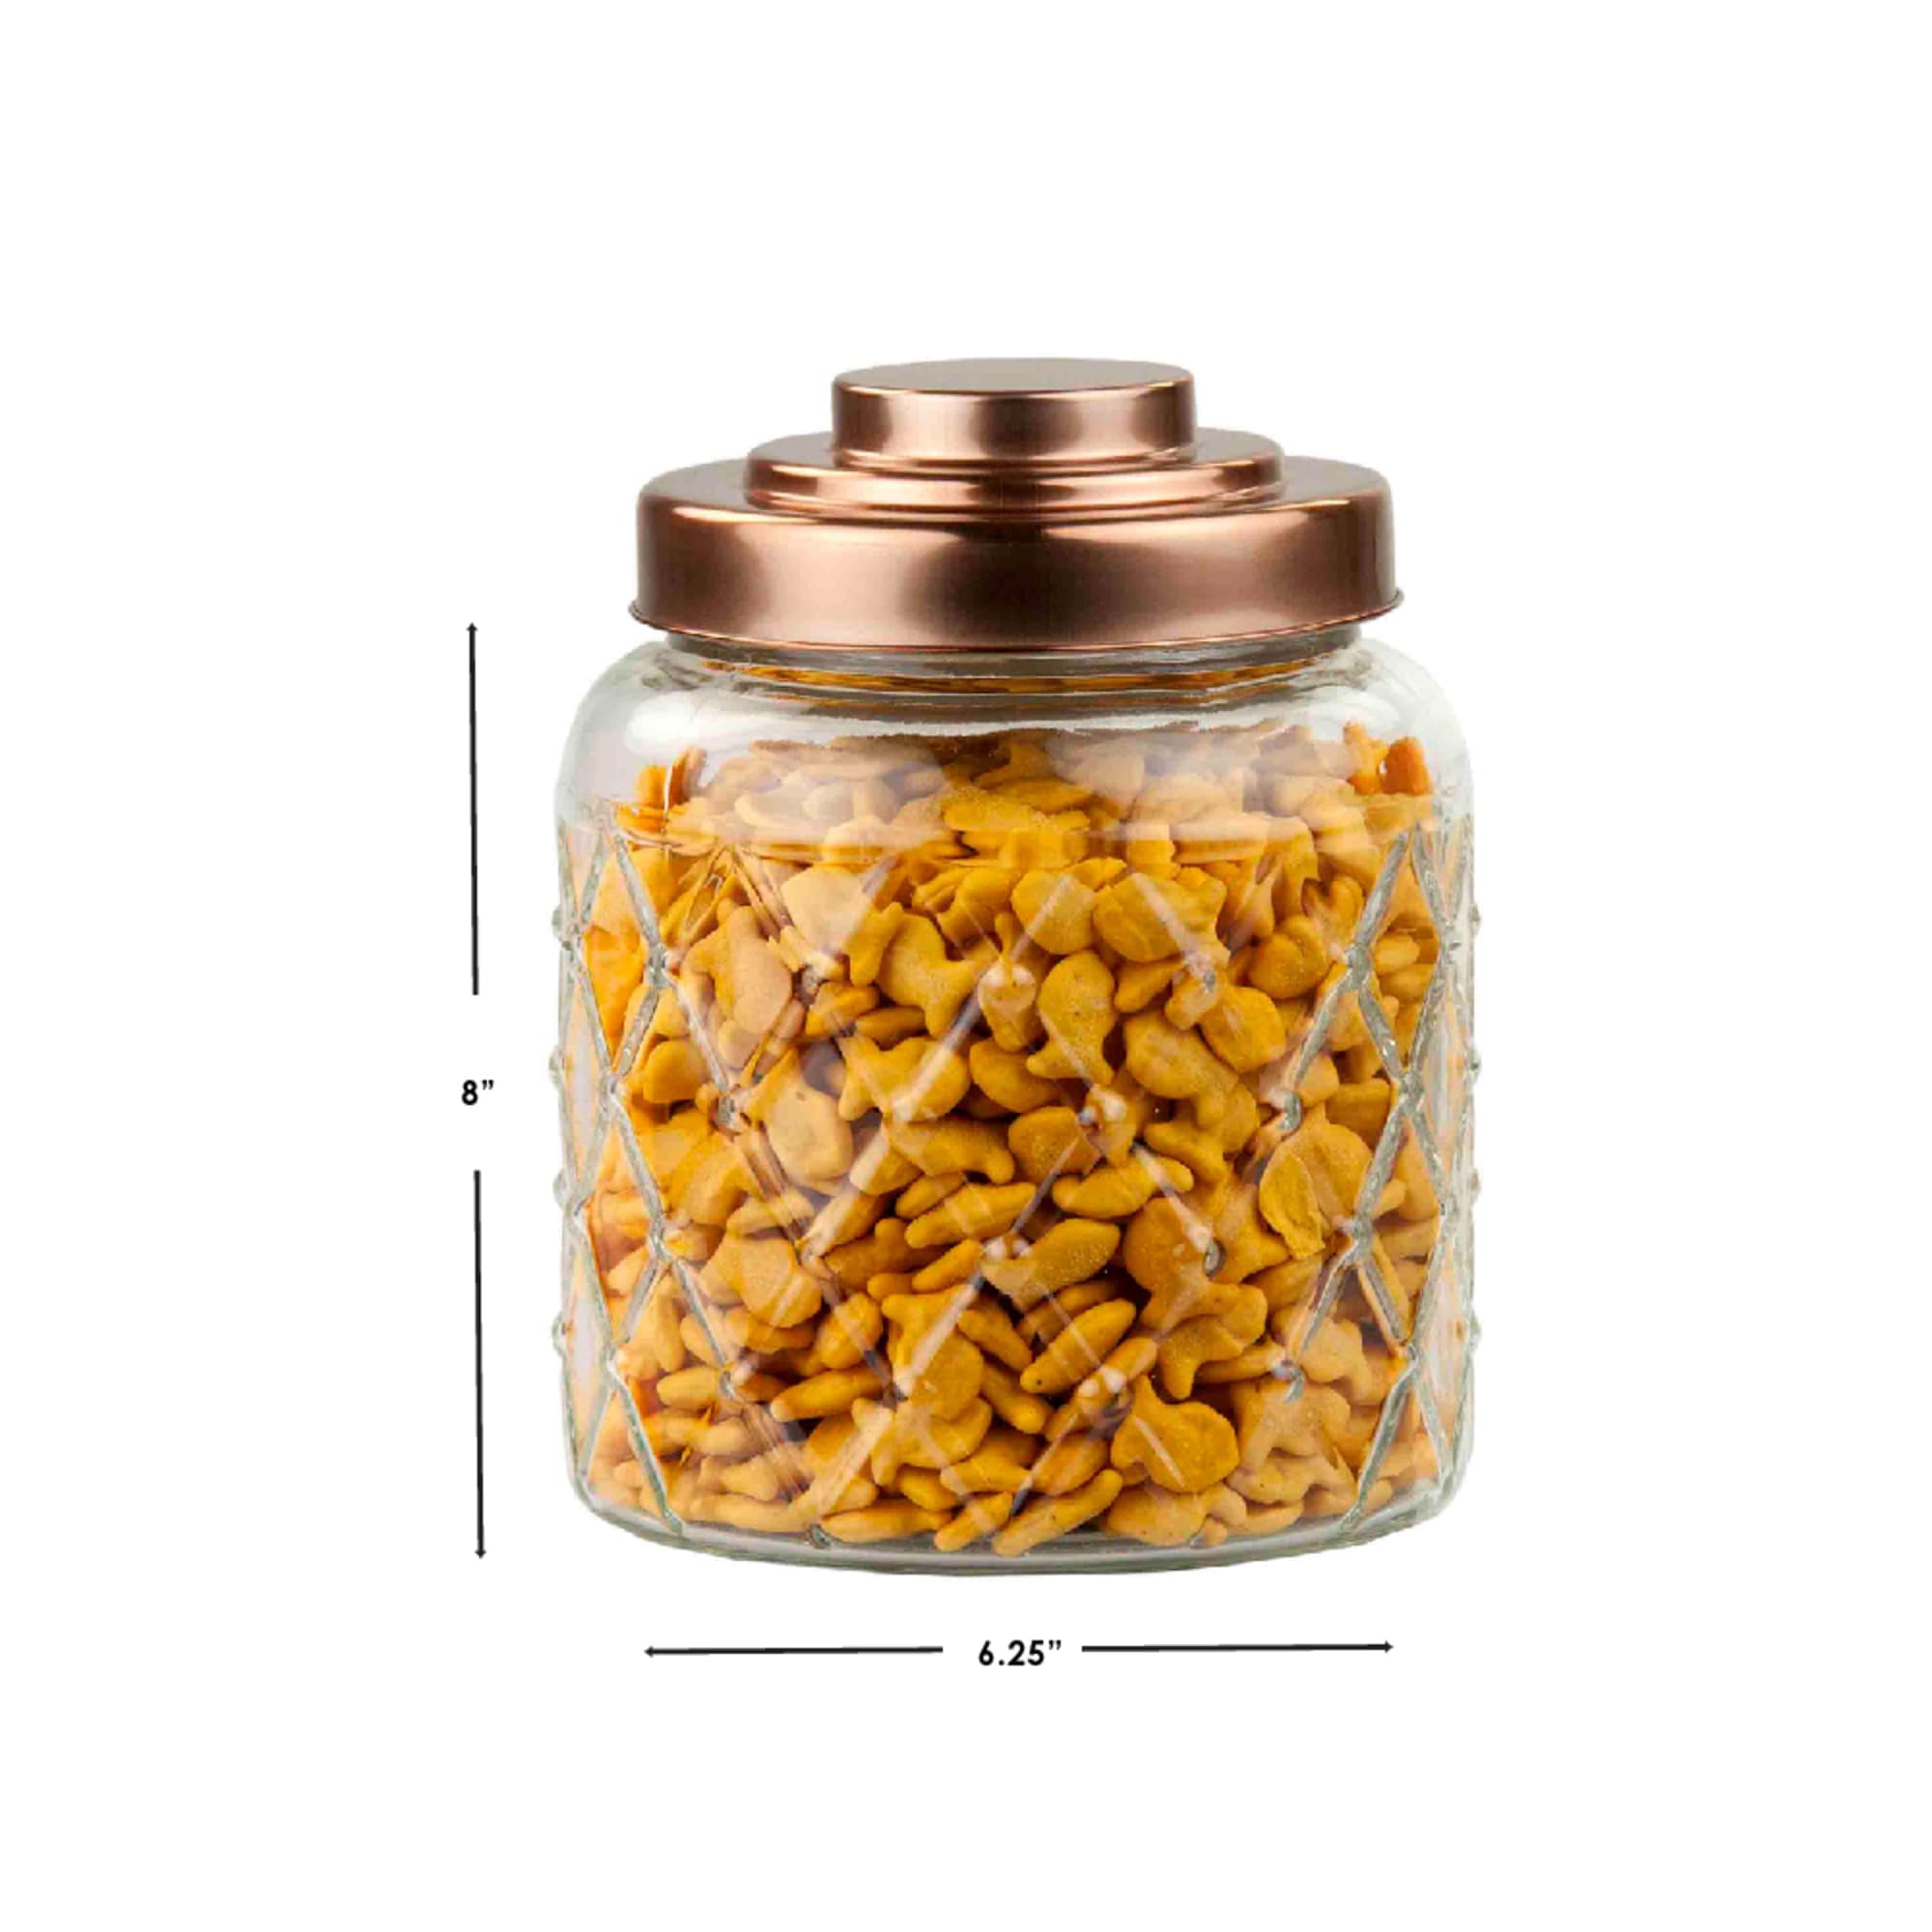 Home Basics Small 2.6 Lt Textured Glass Jar With Gleaming Copper Top $5.00 EACH, CASE PACK OF 6